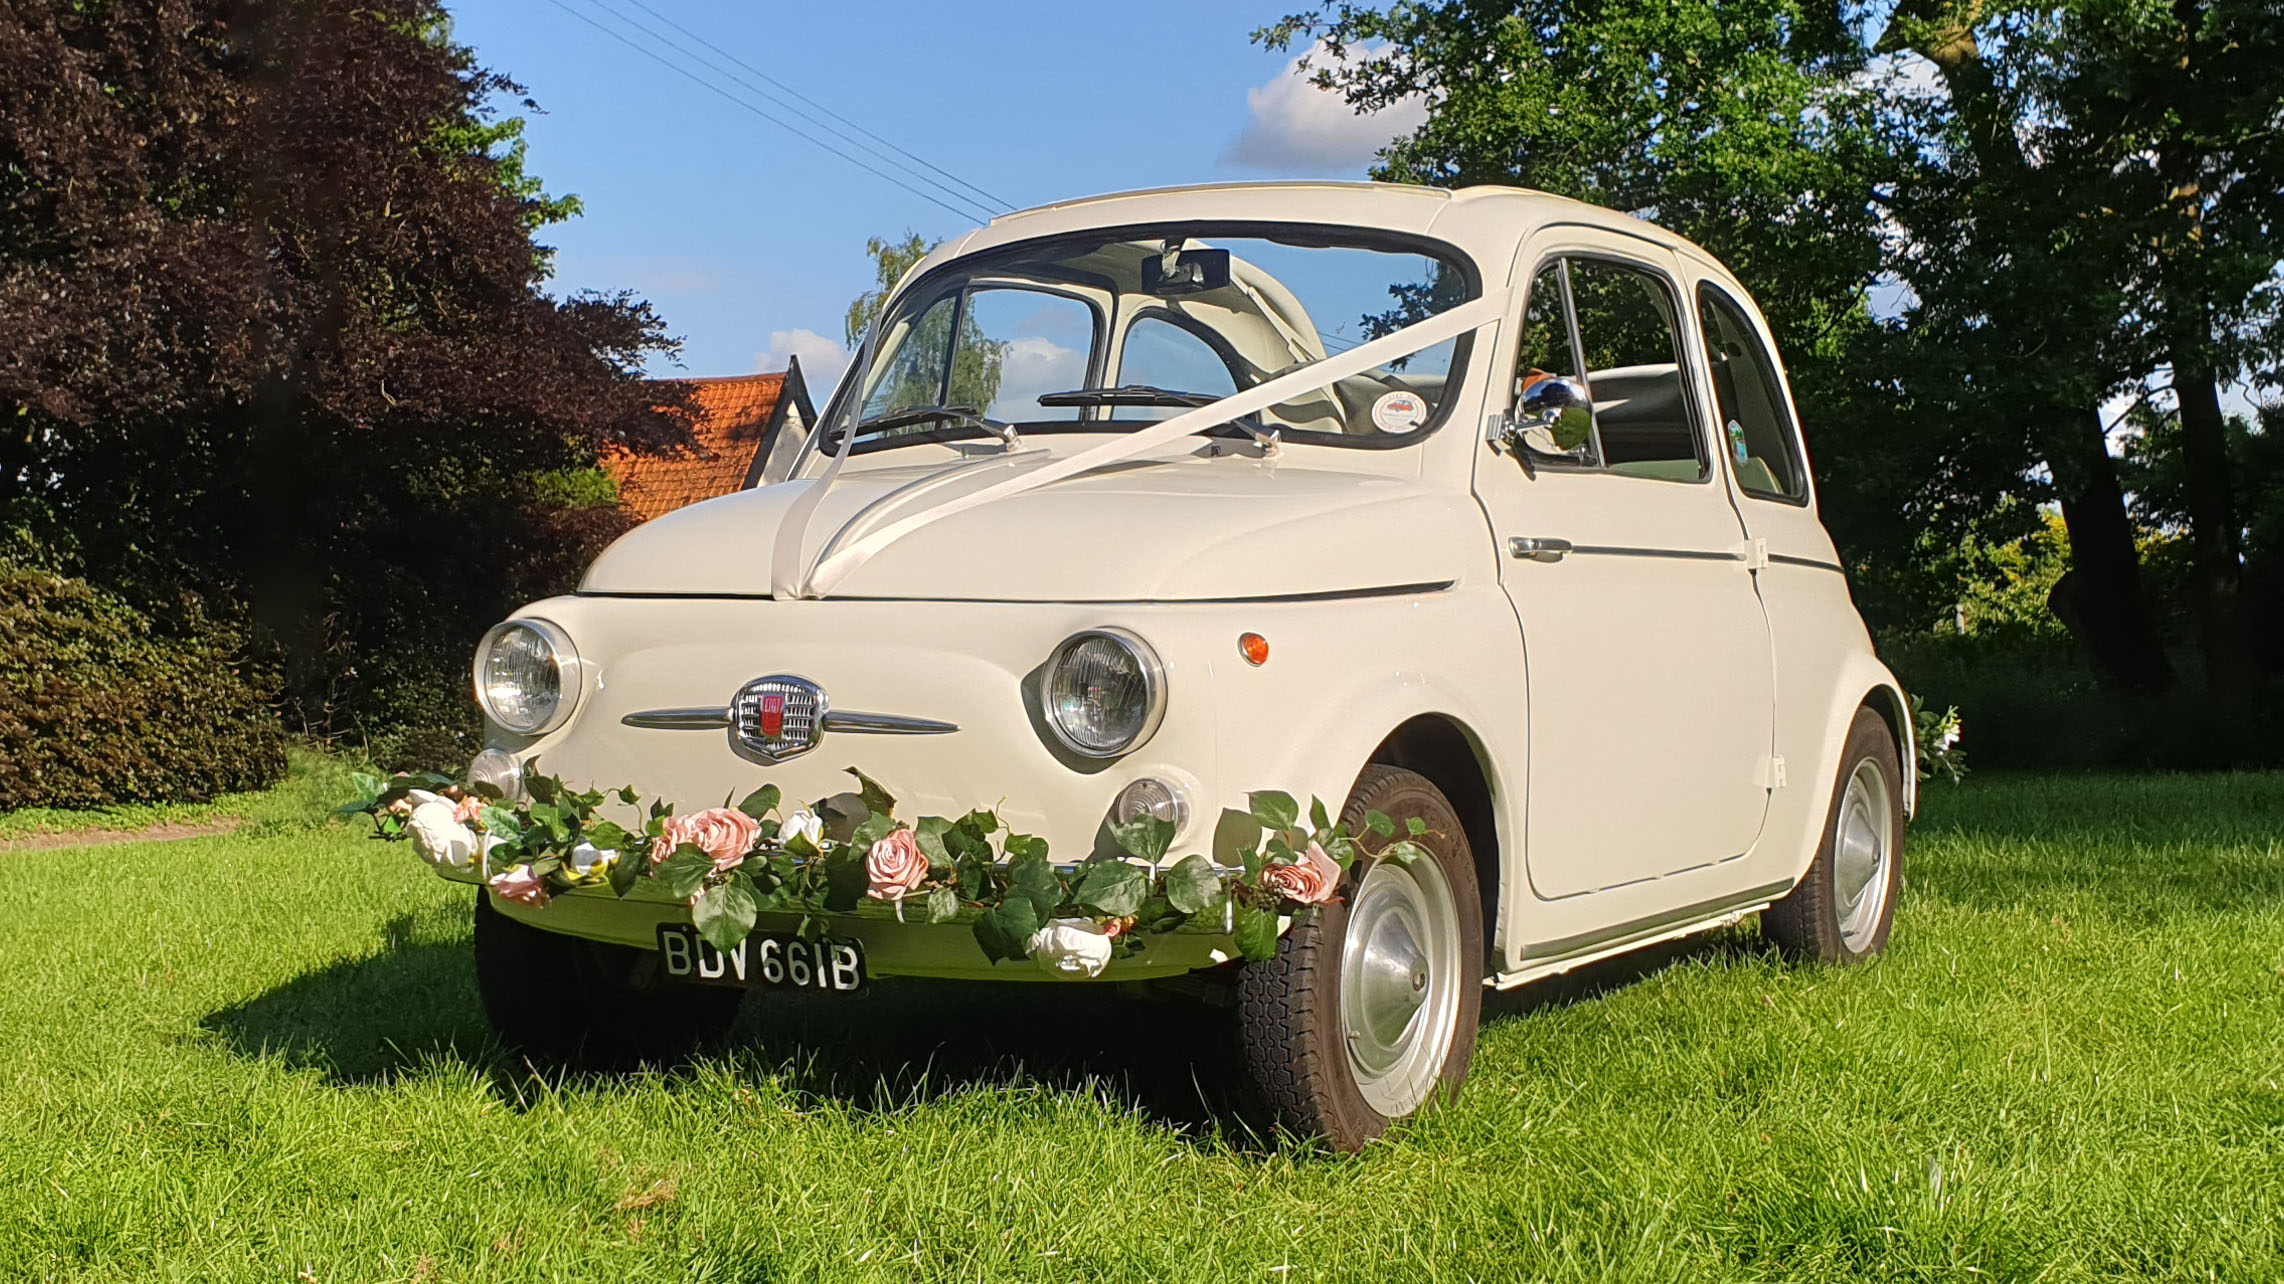 Fiat 500d Convertible wedding car for hire in Thetford, Norfolk